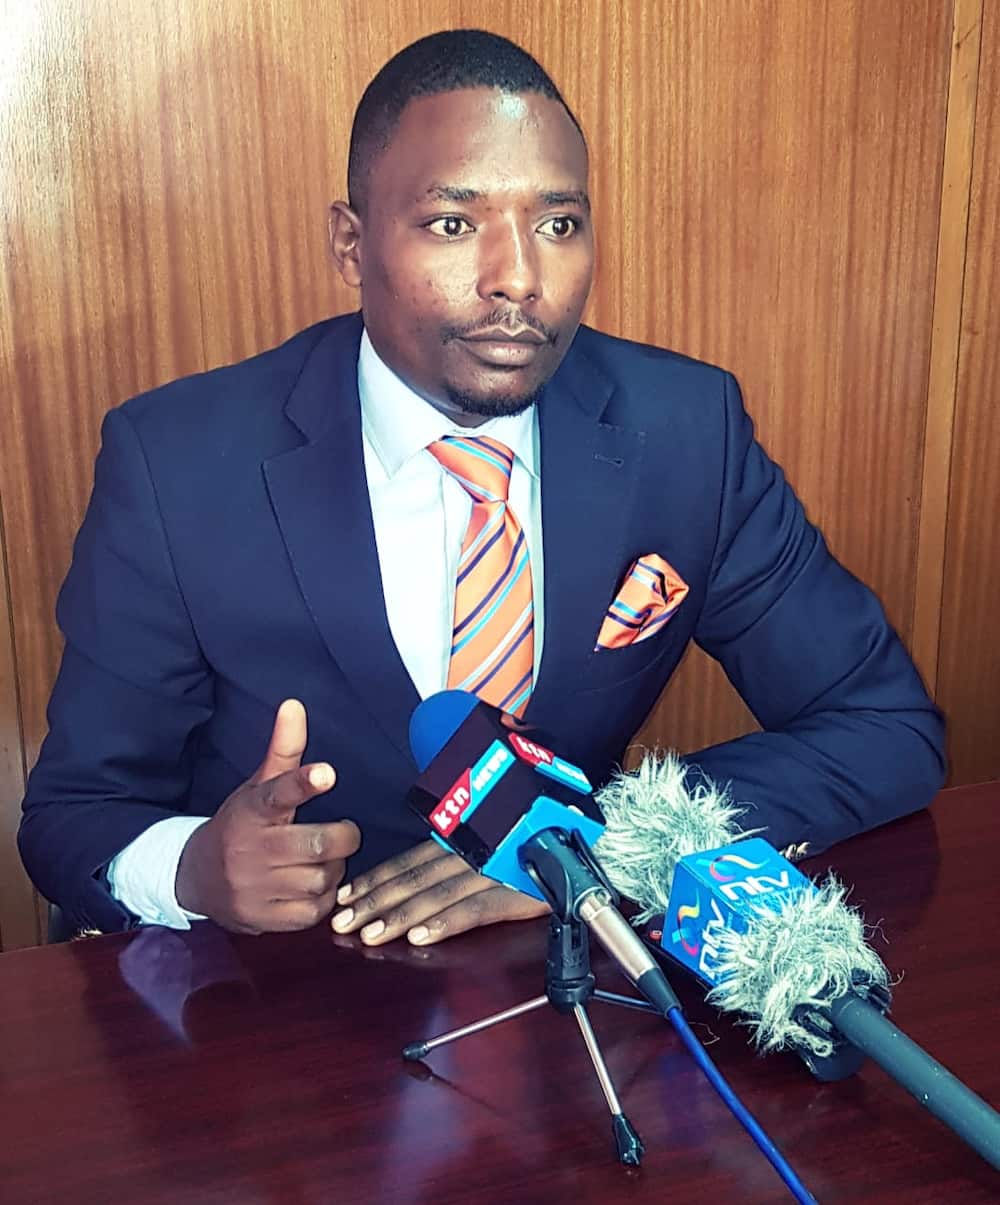 Mt Kenya youth leader condemns Murang'a chaos that left 2 dead